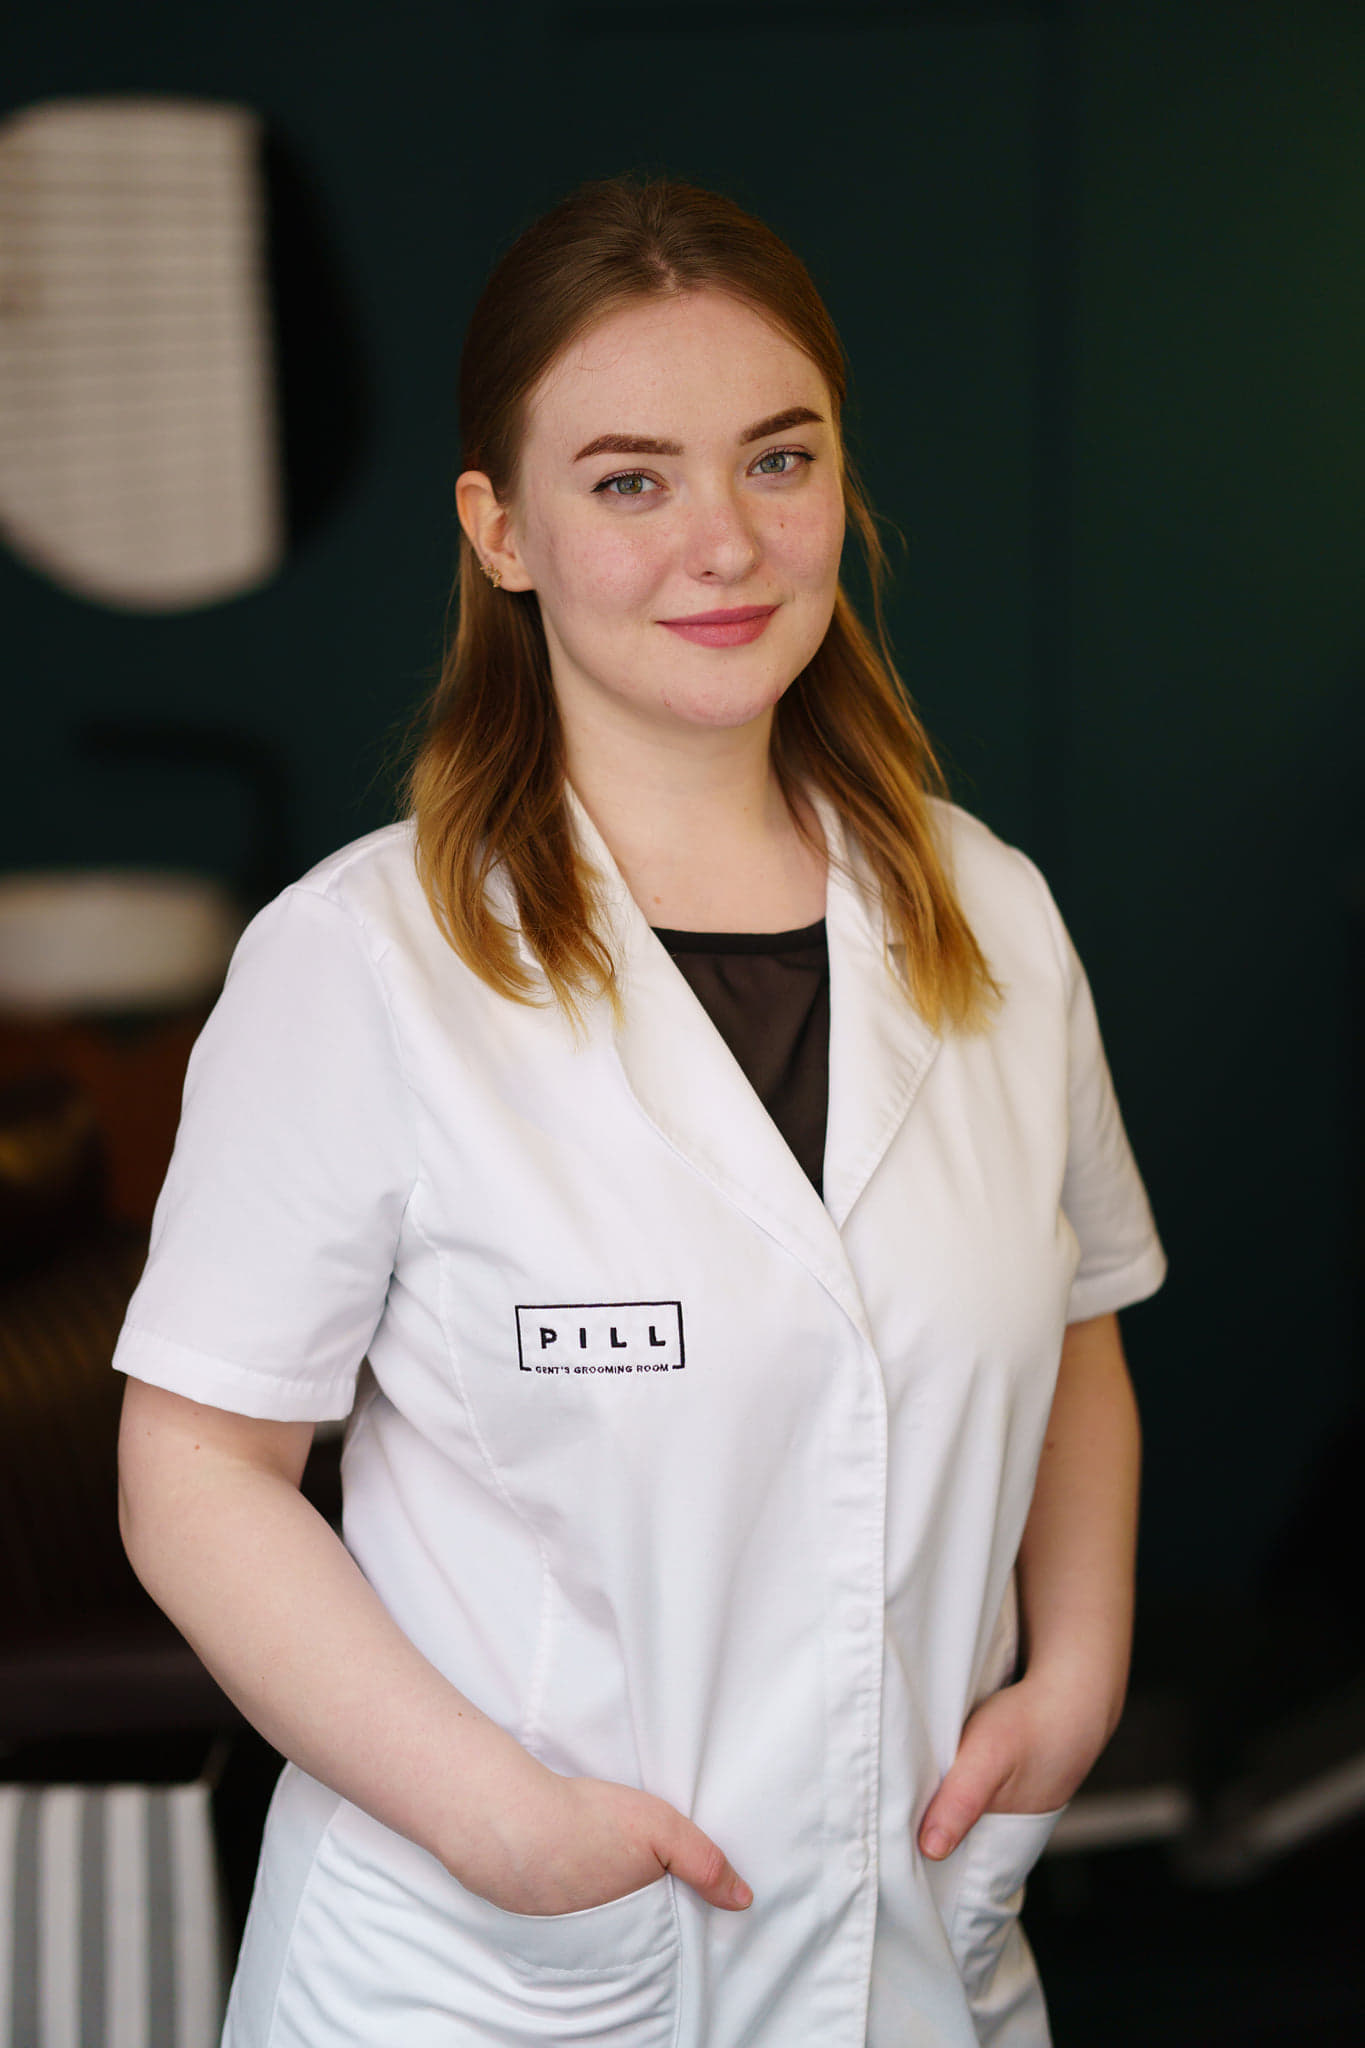 PILL Gent's Grooming Room SPA therapist Victoria